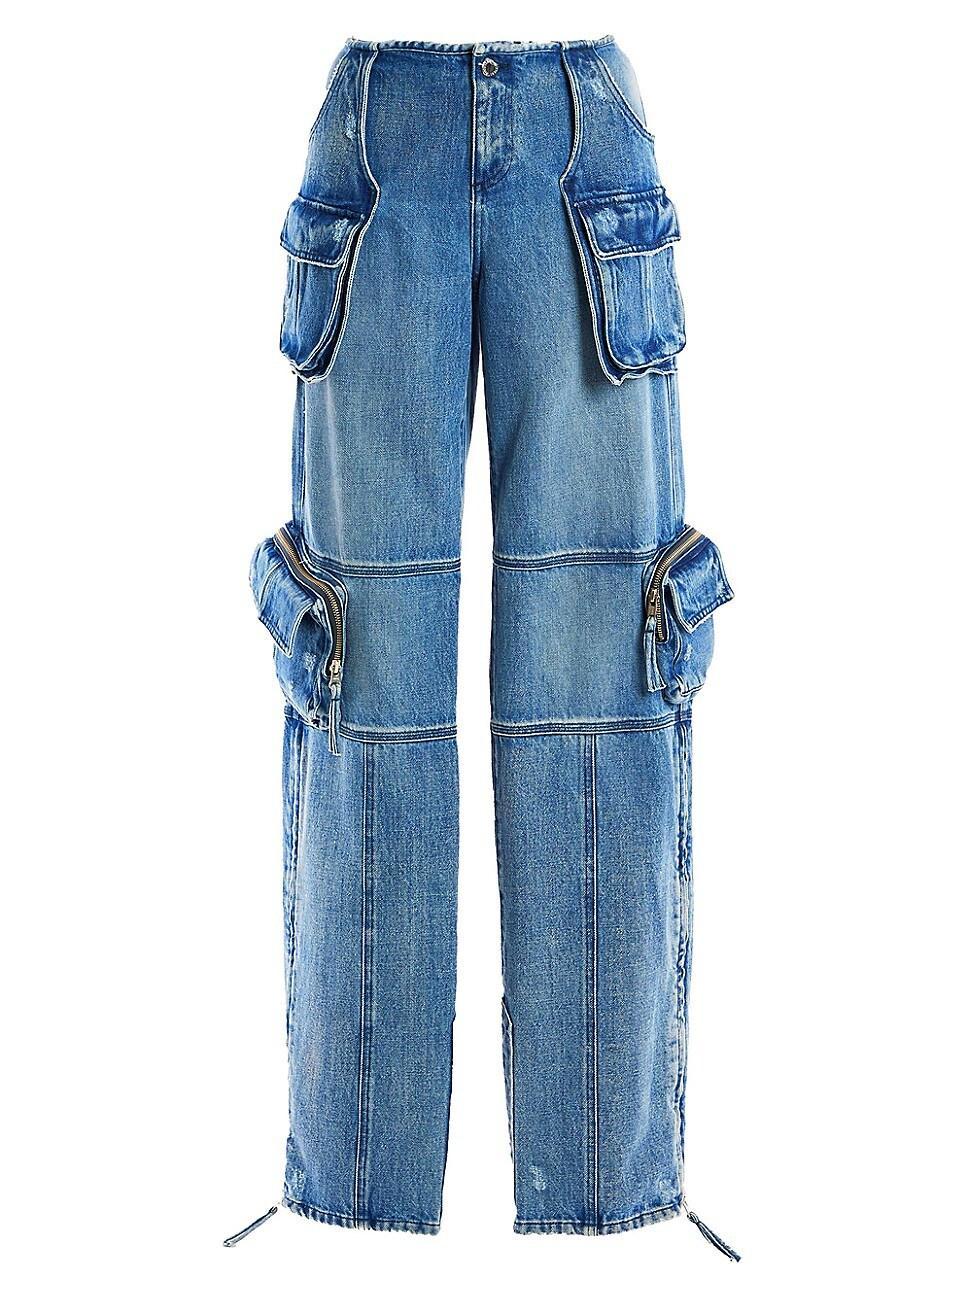 Womens Tammy Cargo Jeans Product Image